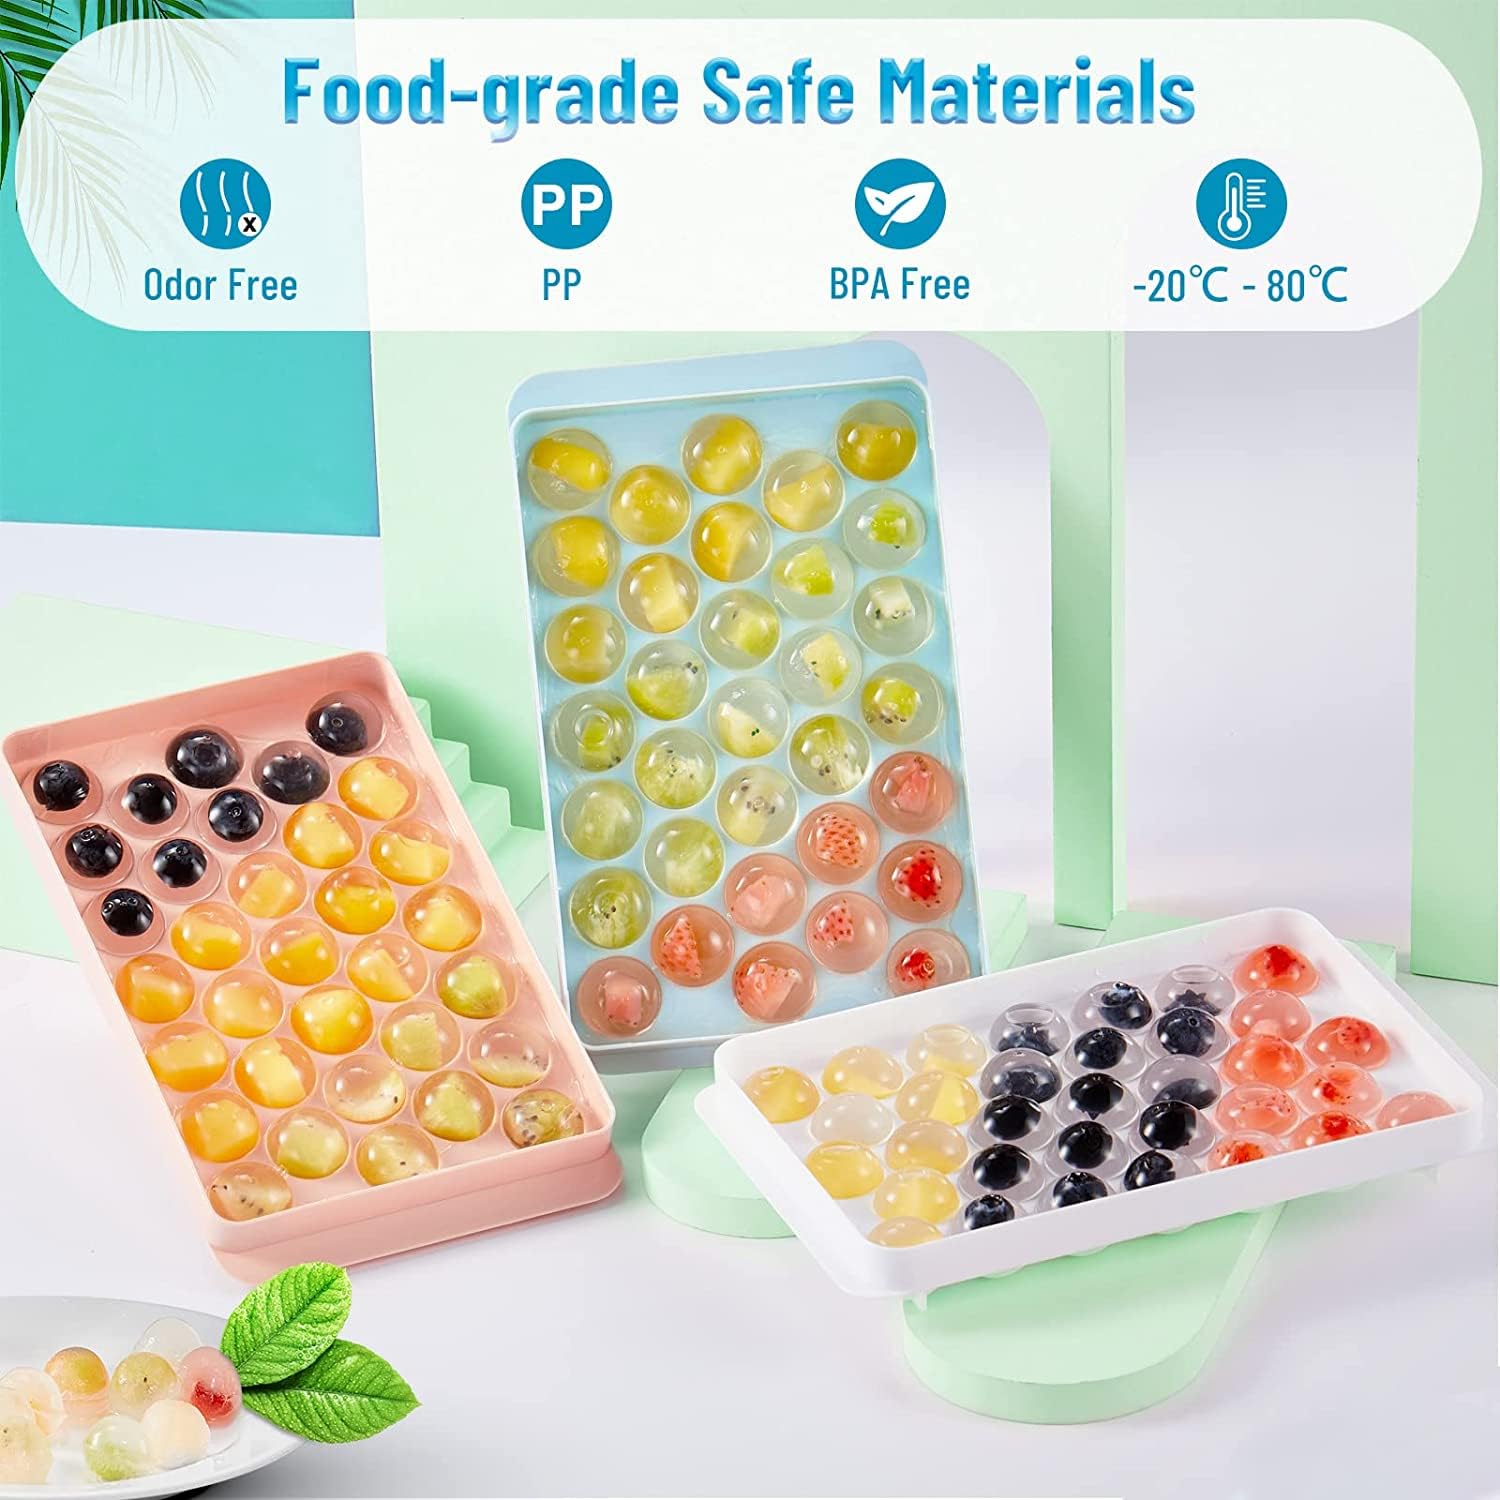 Round Ball Ice Tray Plastic Ice Cube Mold Refrigerator Ice Ball Mold With Lid